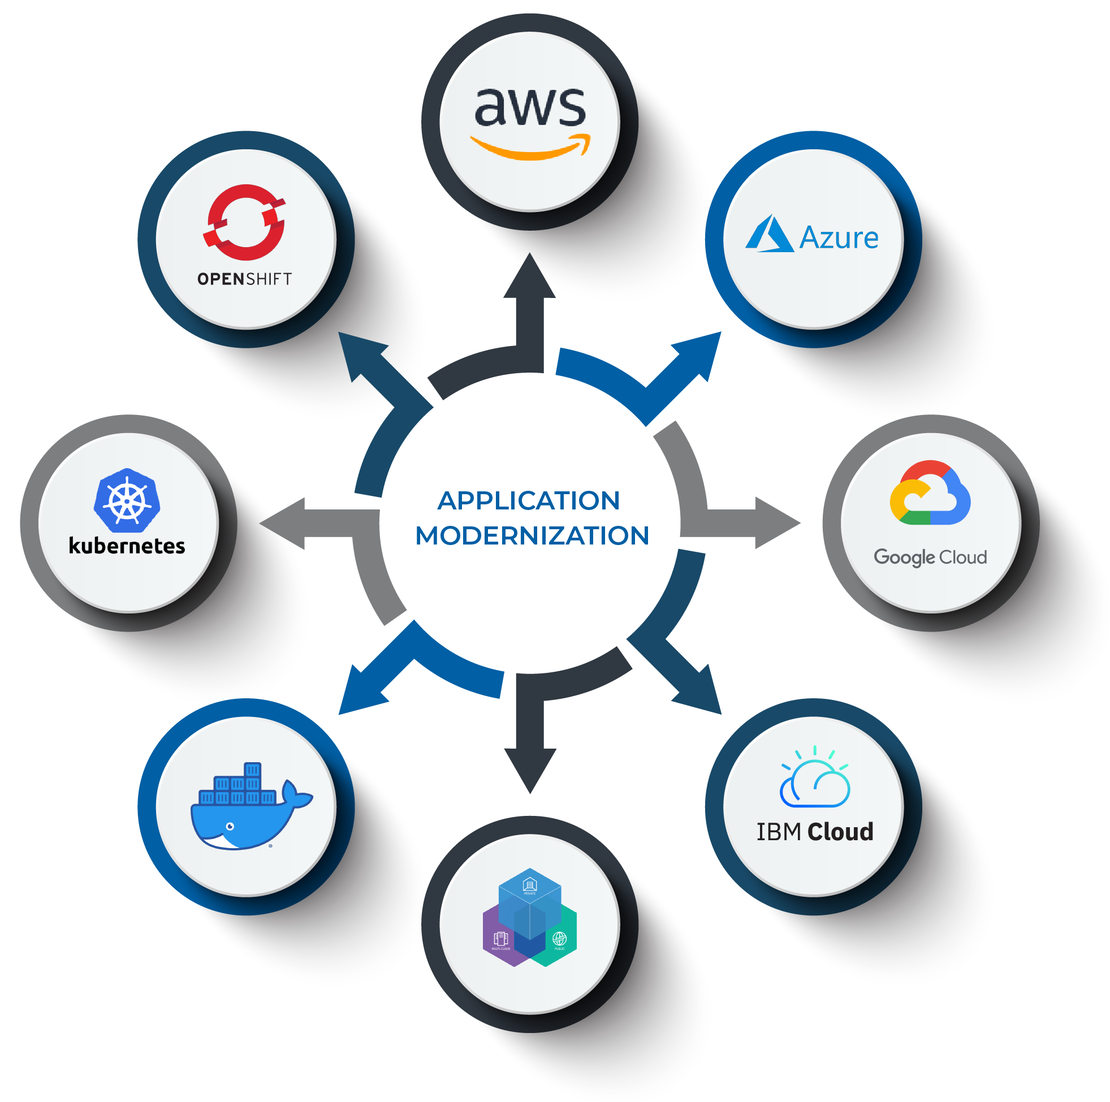 Graphic about Application Modernization , which tools are used for it